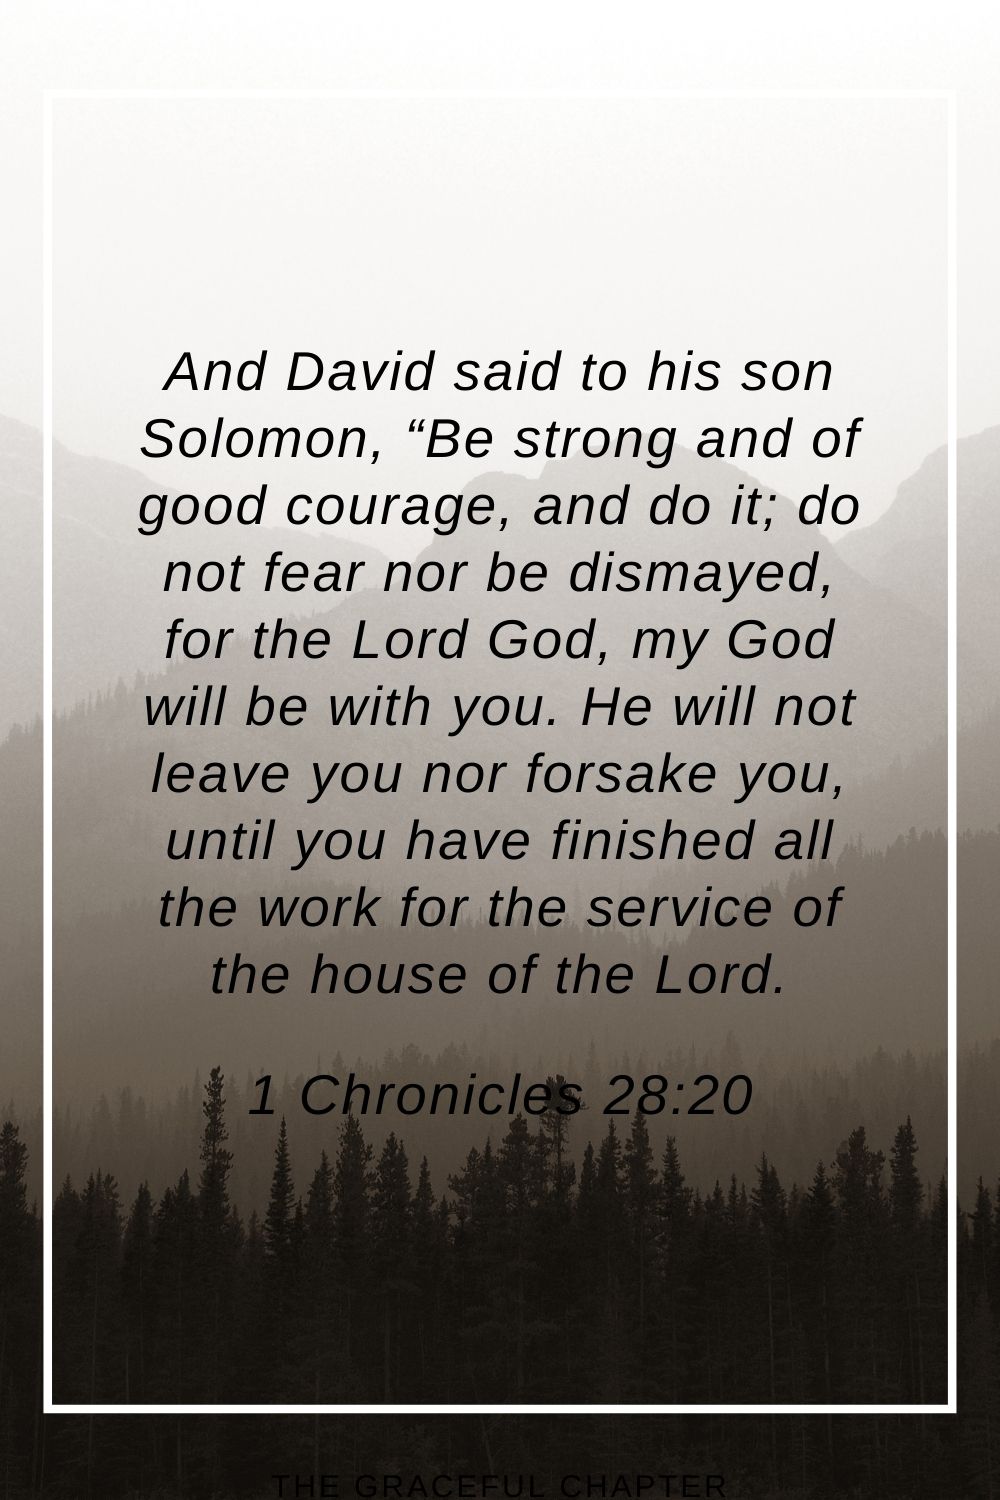 And David said to his son Solomon, “Be strong and of good courage, and do it; do not fear nor be dismayed, for the Lord God, my God will be with you. He will not leave you nor forsake you, until you have finished all the work for the service of the house of the Lord. 1 Chronicles 28:20